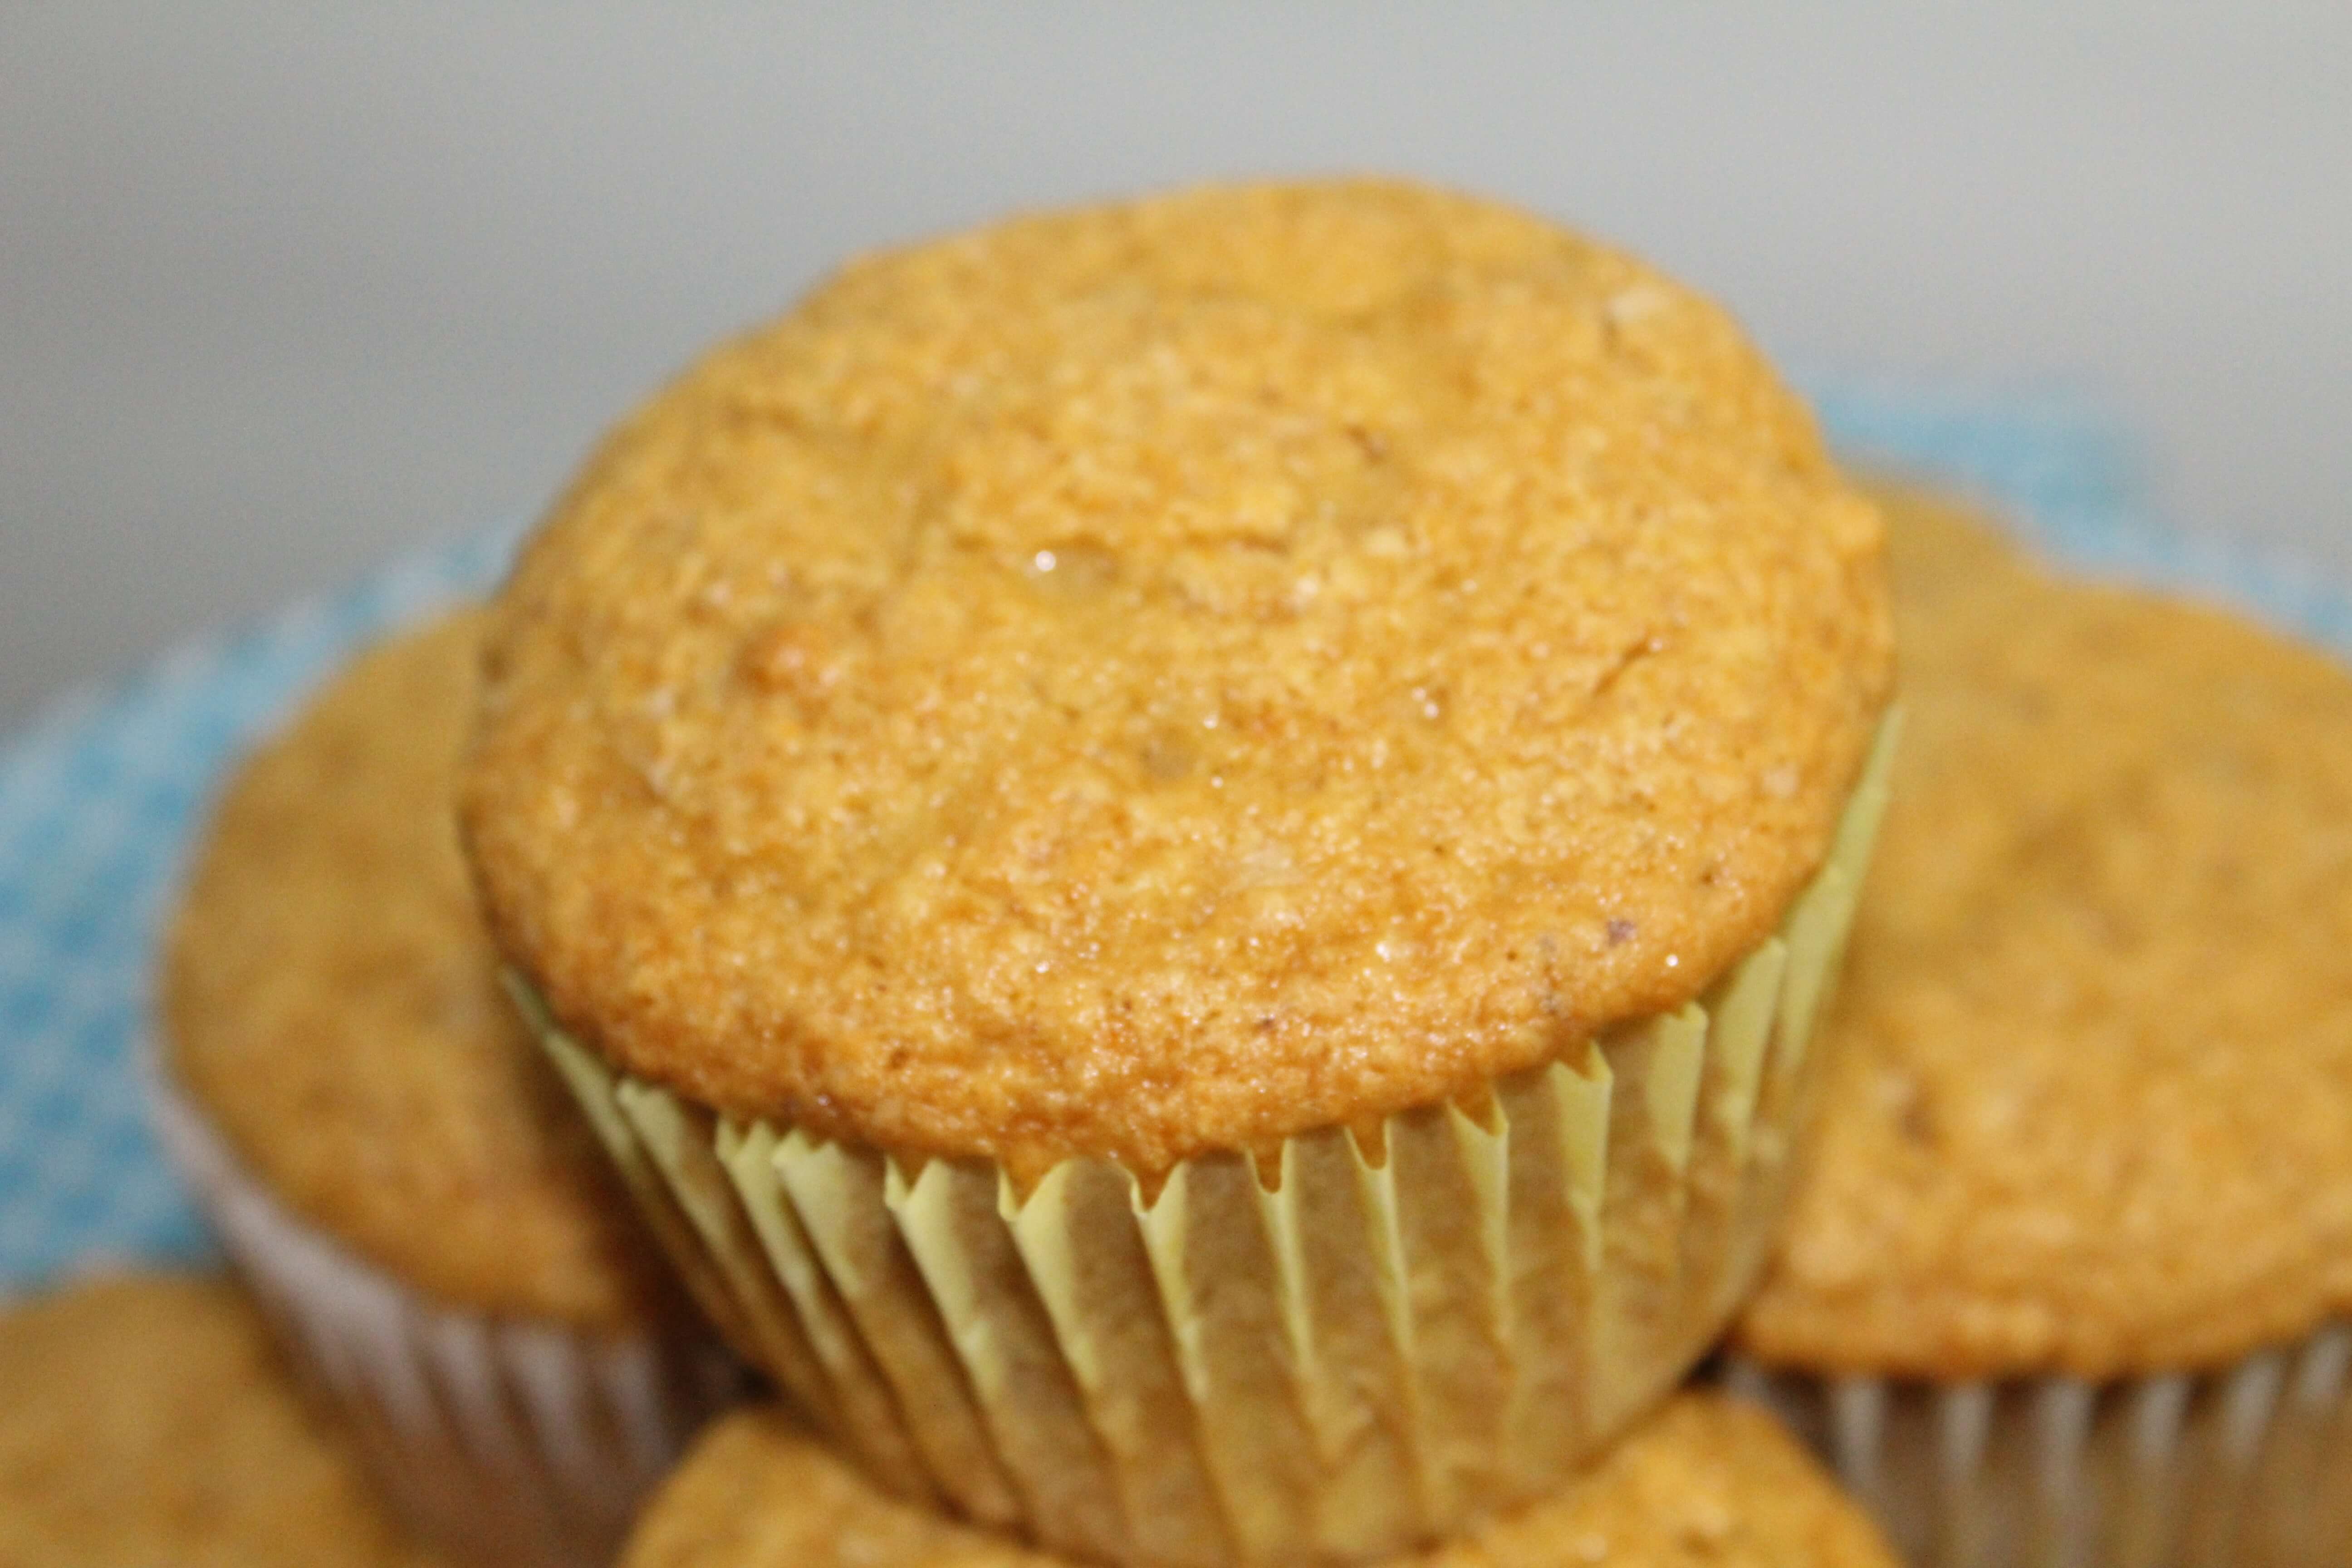 Have you tried these 2-ingredient Apple Banana Muffins yet?